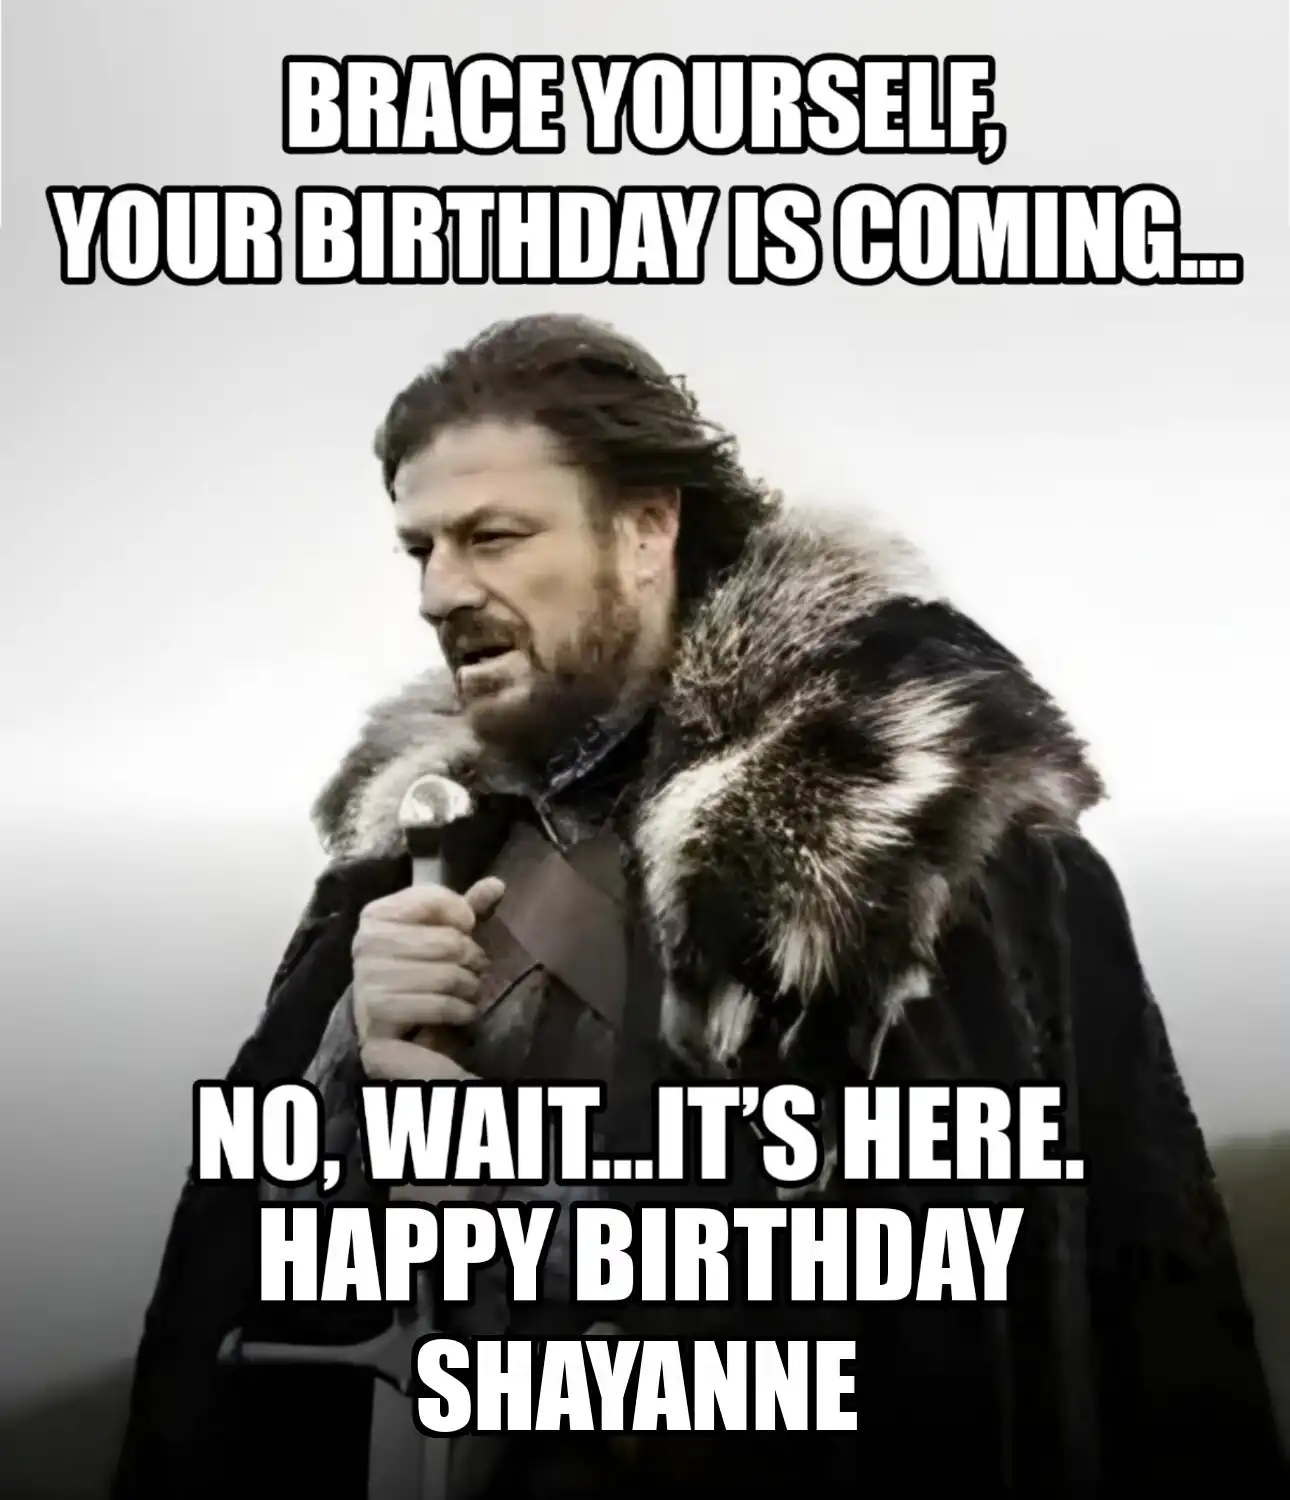 Happy Birthday Shayanne Brace Yourself Your Birthday Is Coming Meme